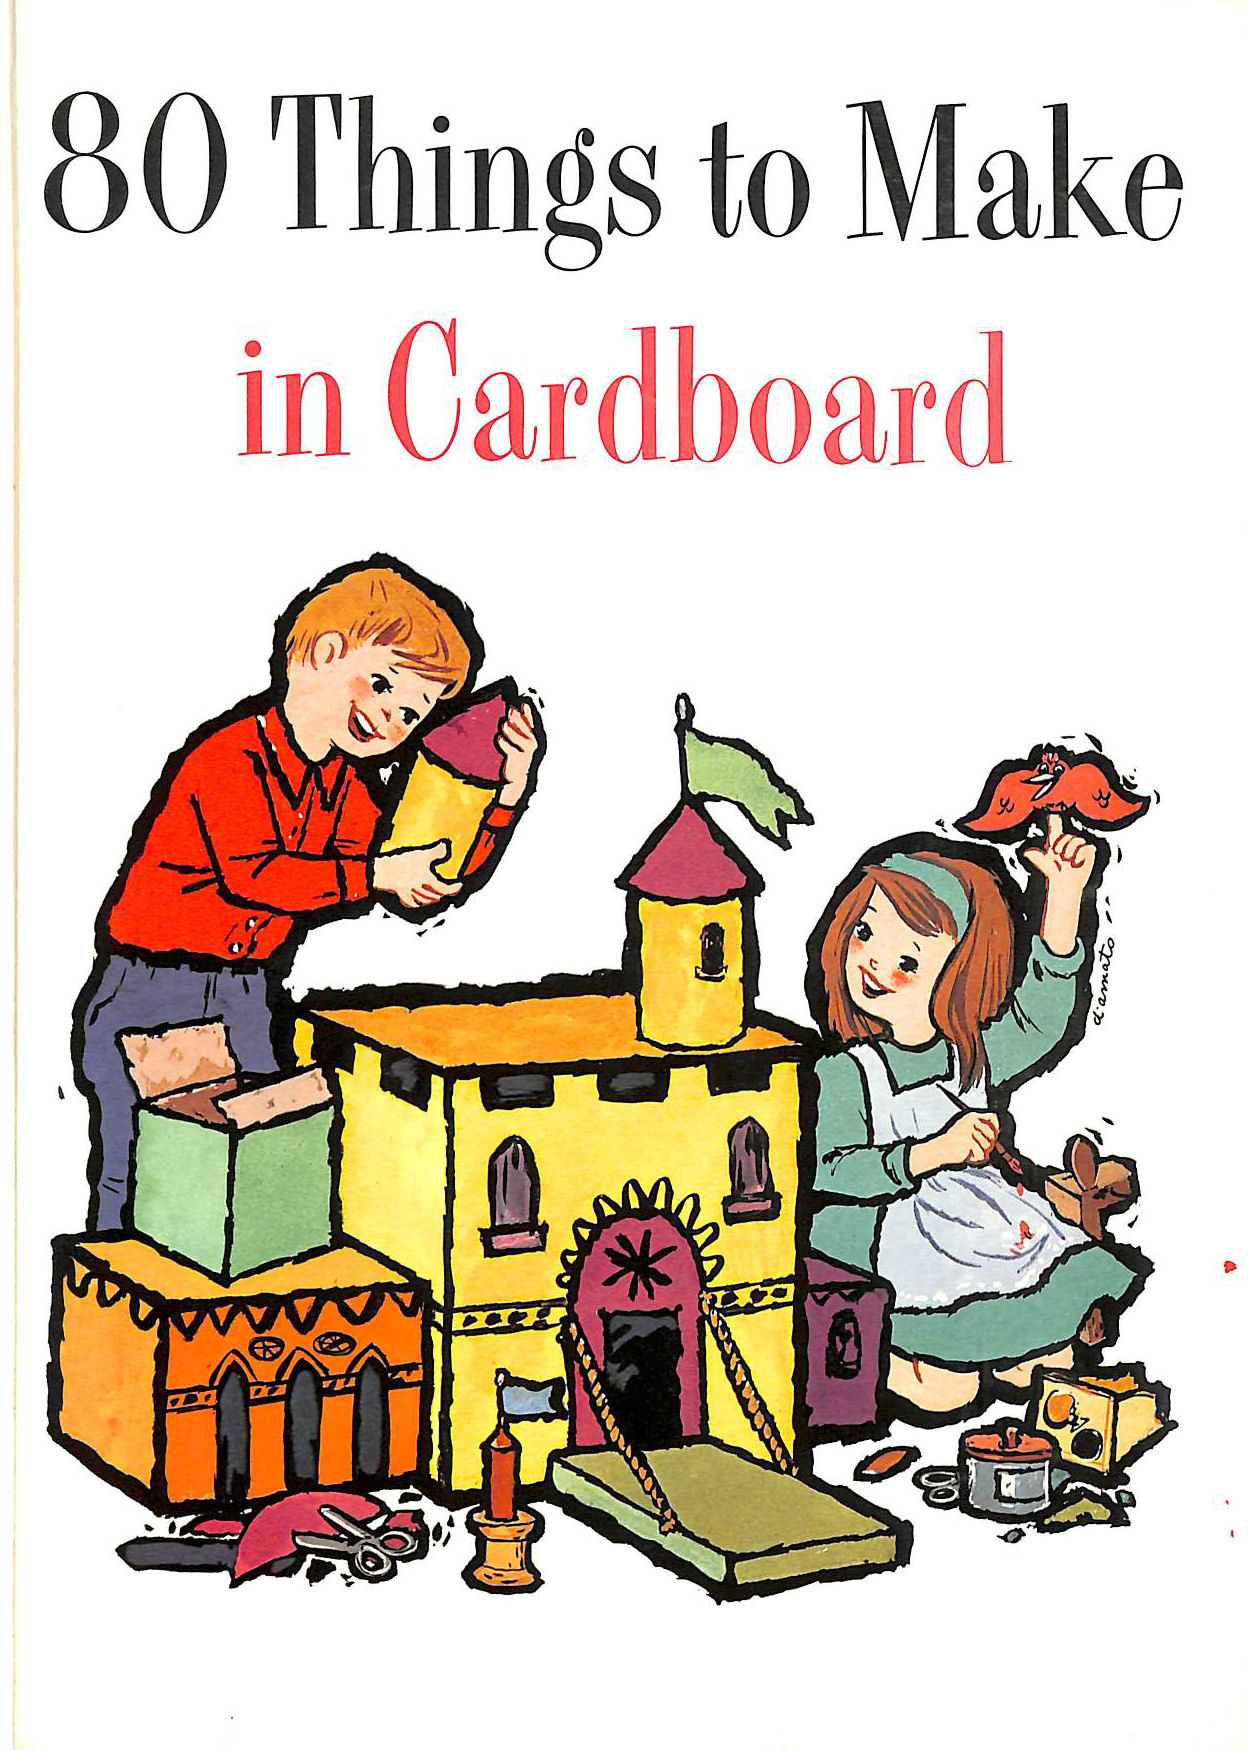 D'AMATO, JANET; JANET D'AMATO & ALEX D'AMATO. [ILLUSTRATOR] - 80 THINGS TO MAKE IN CARDBOARD